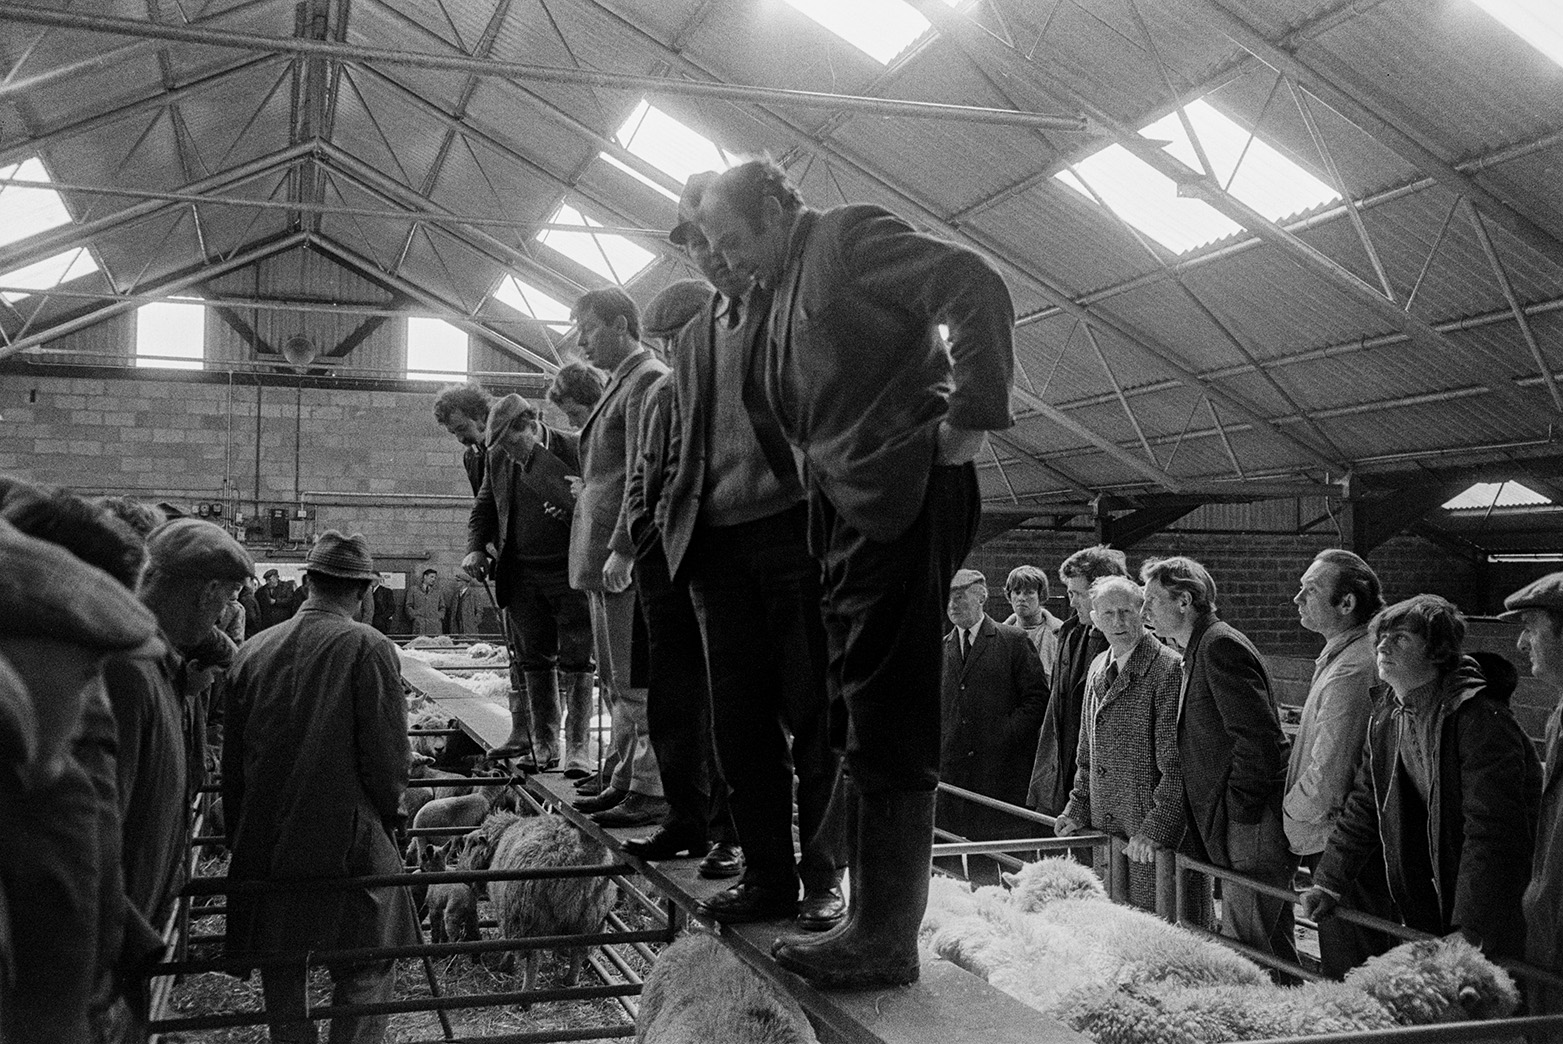 Hatherleigh Market. Men stood on boards above sheep pens looking at the livestock below.